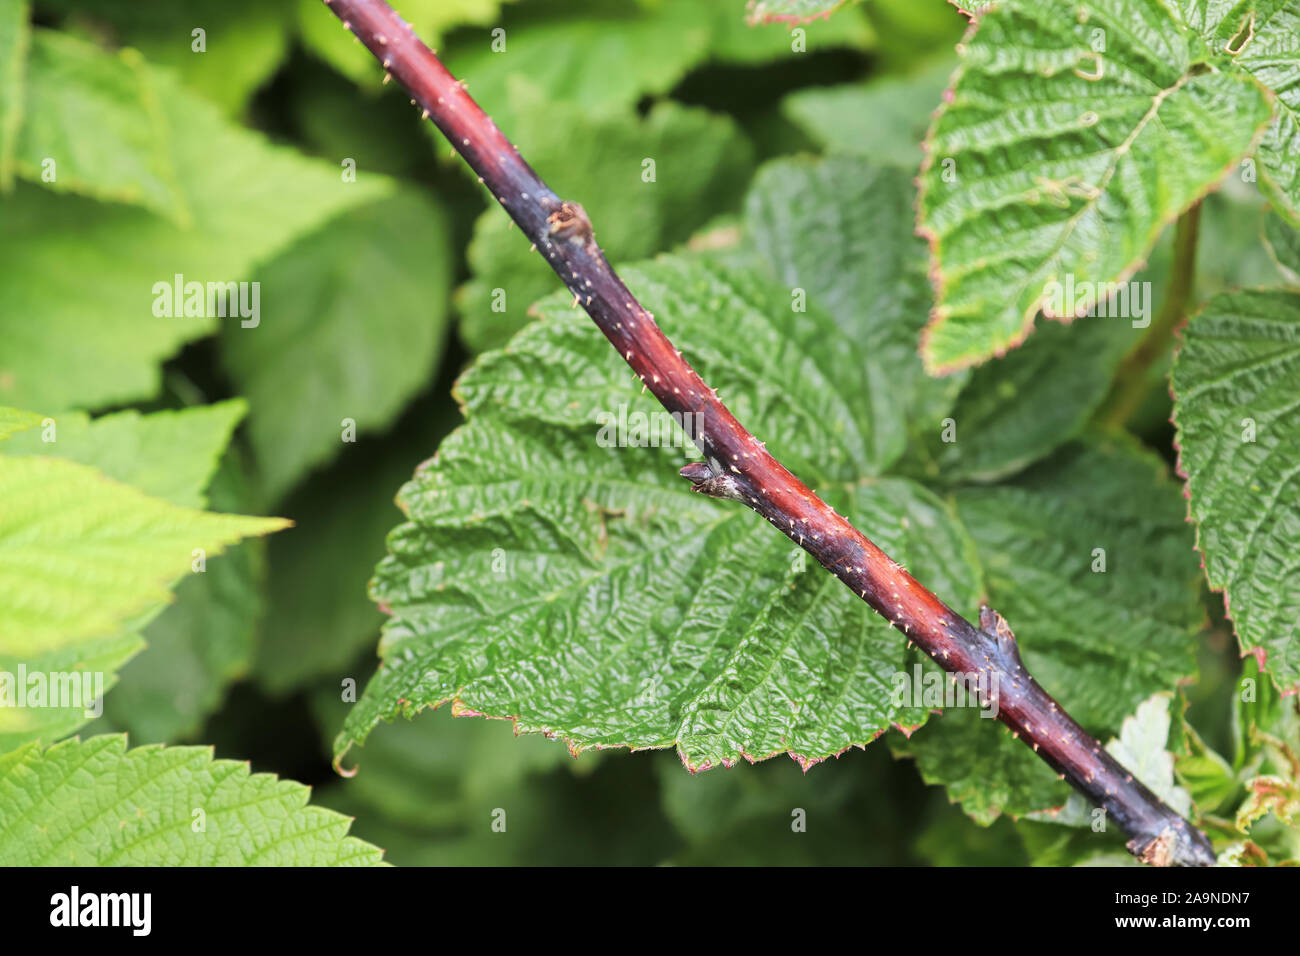 Closeup of a raspberry inflected with cane blight Stock Photo